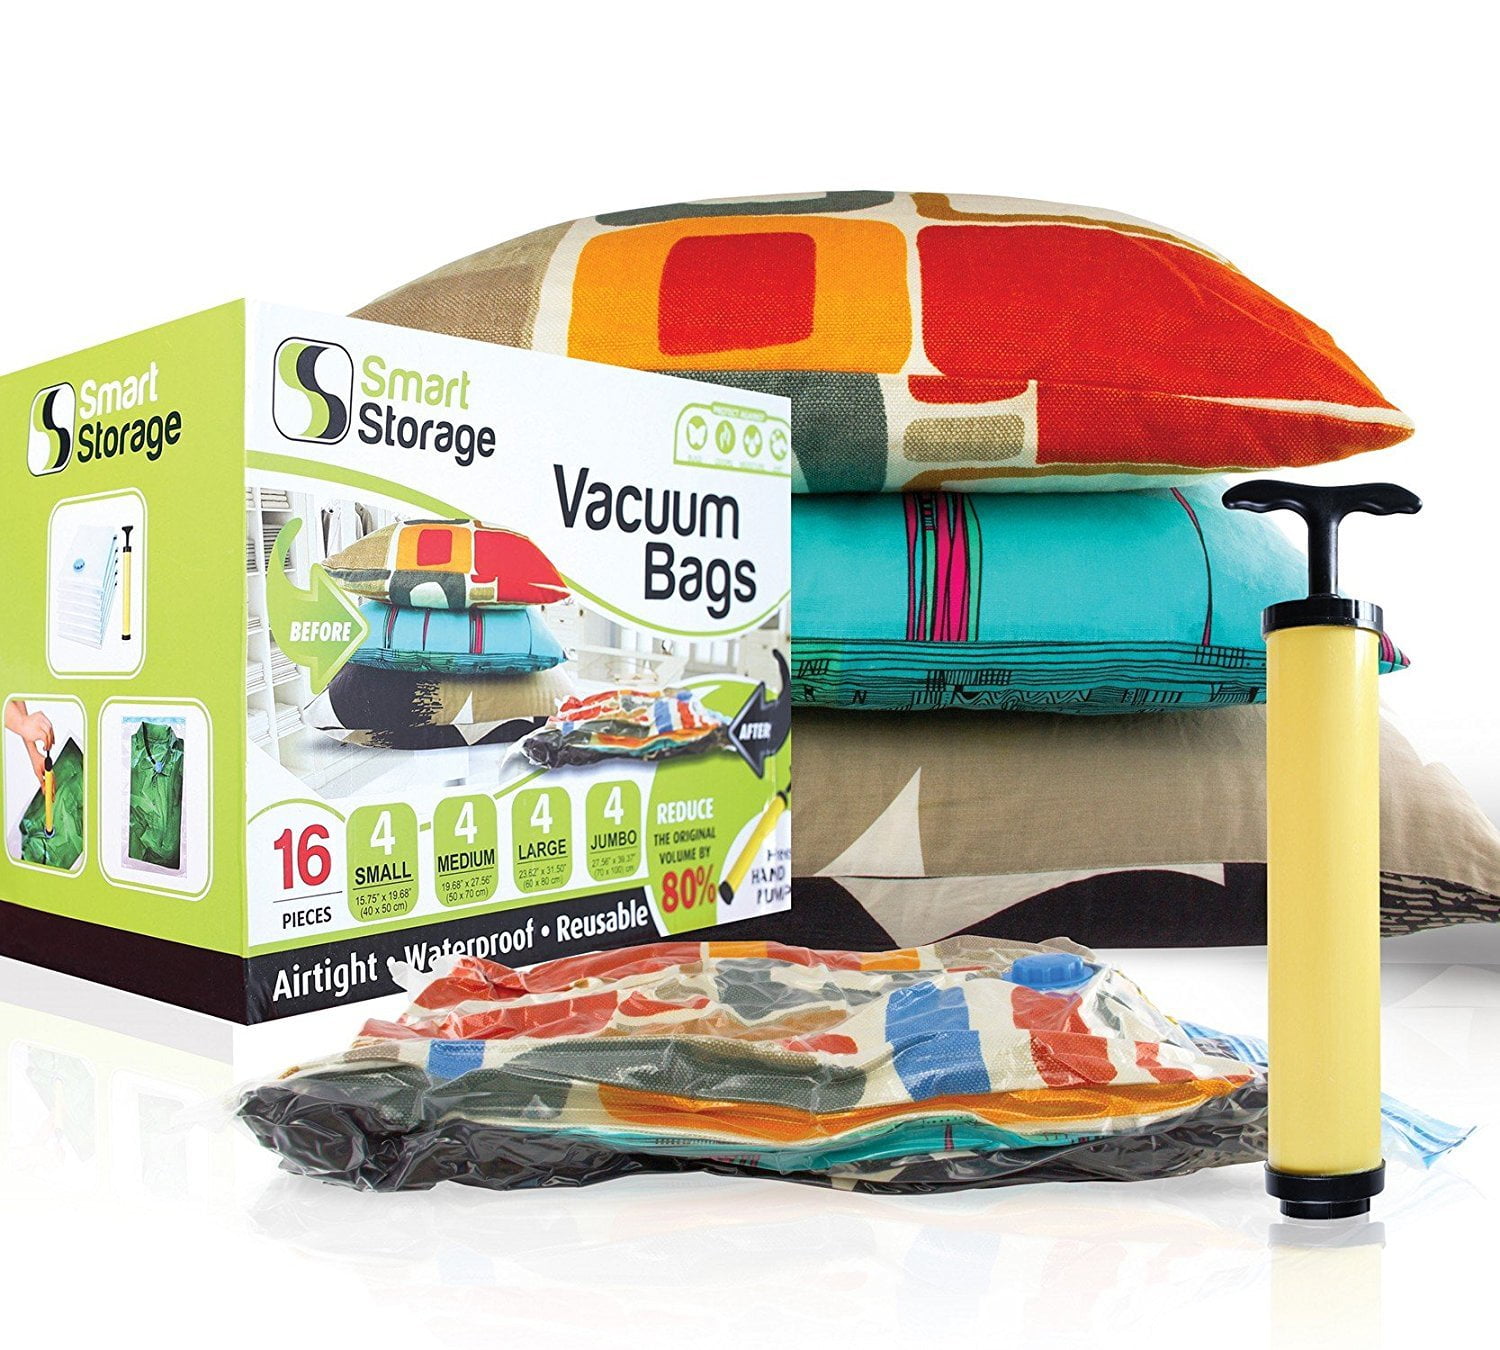 Vacuum storage bags • Compare & find best price now »